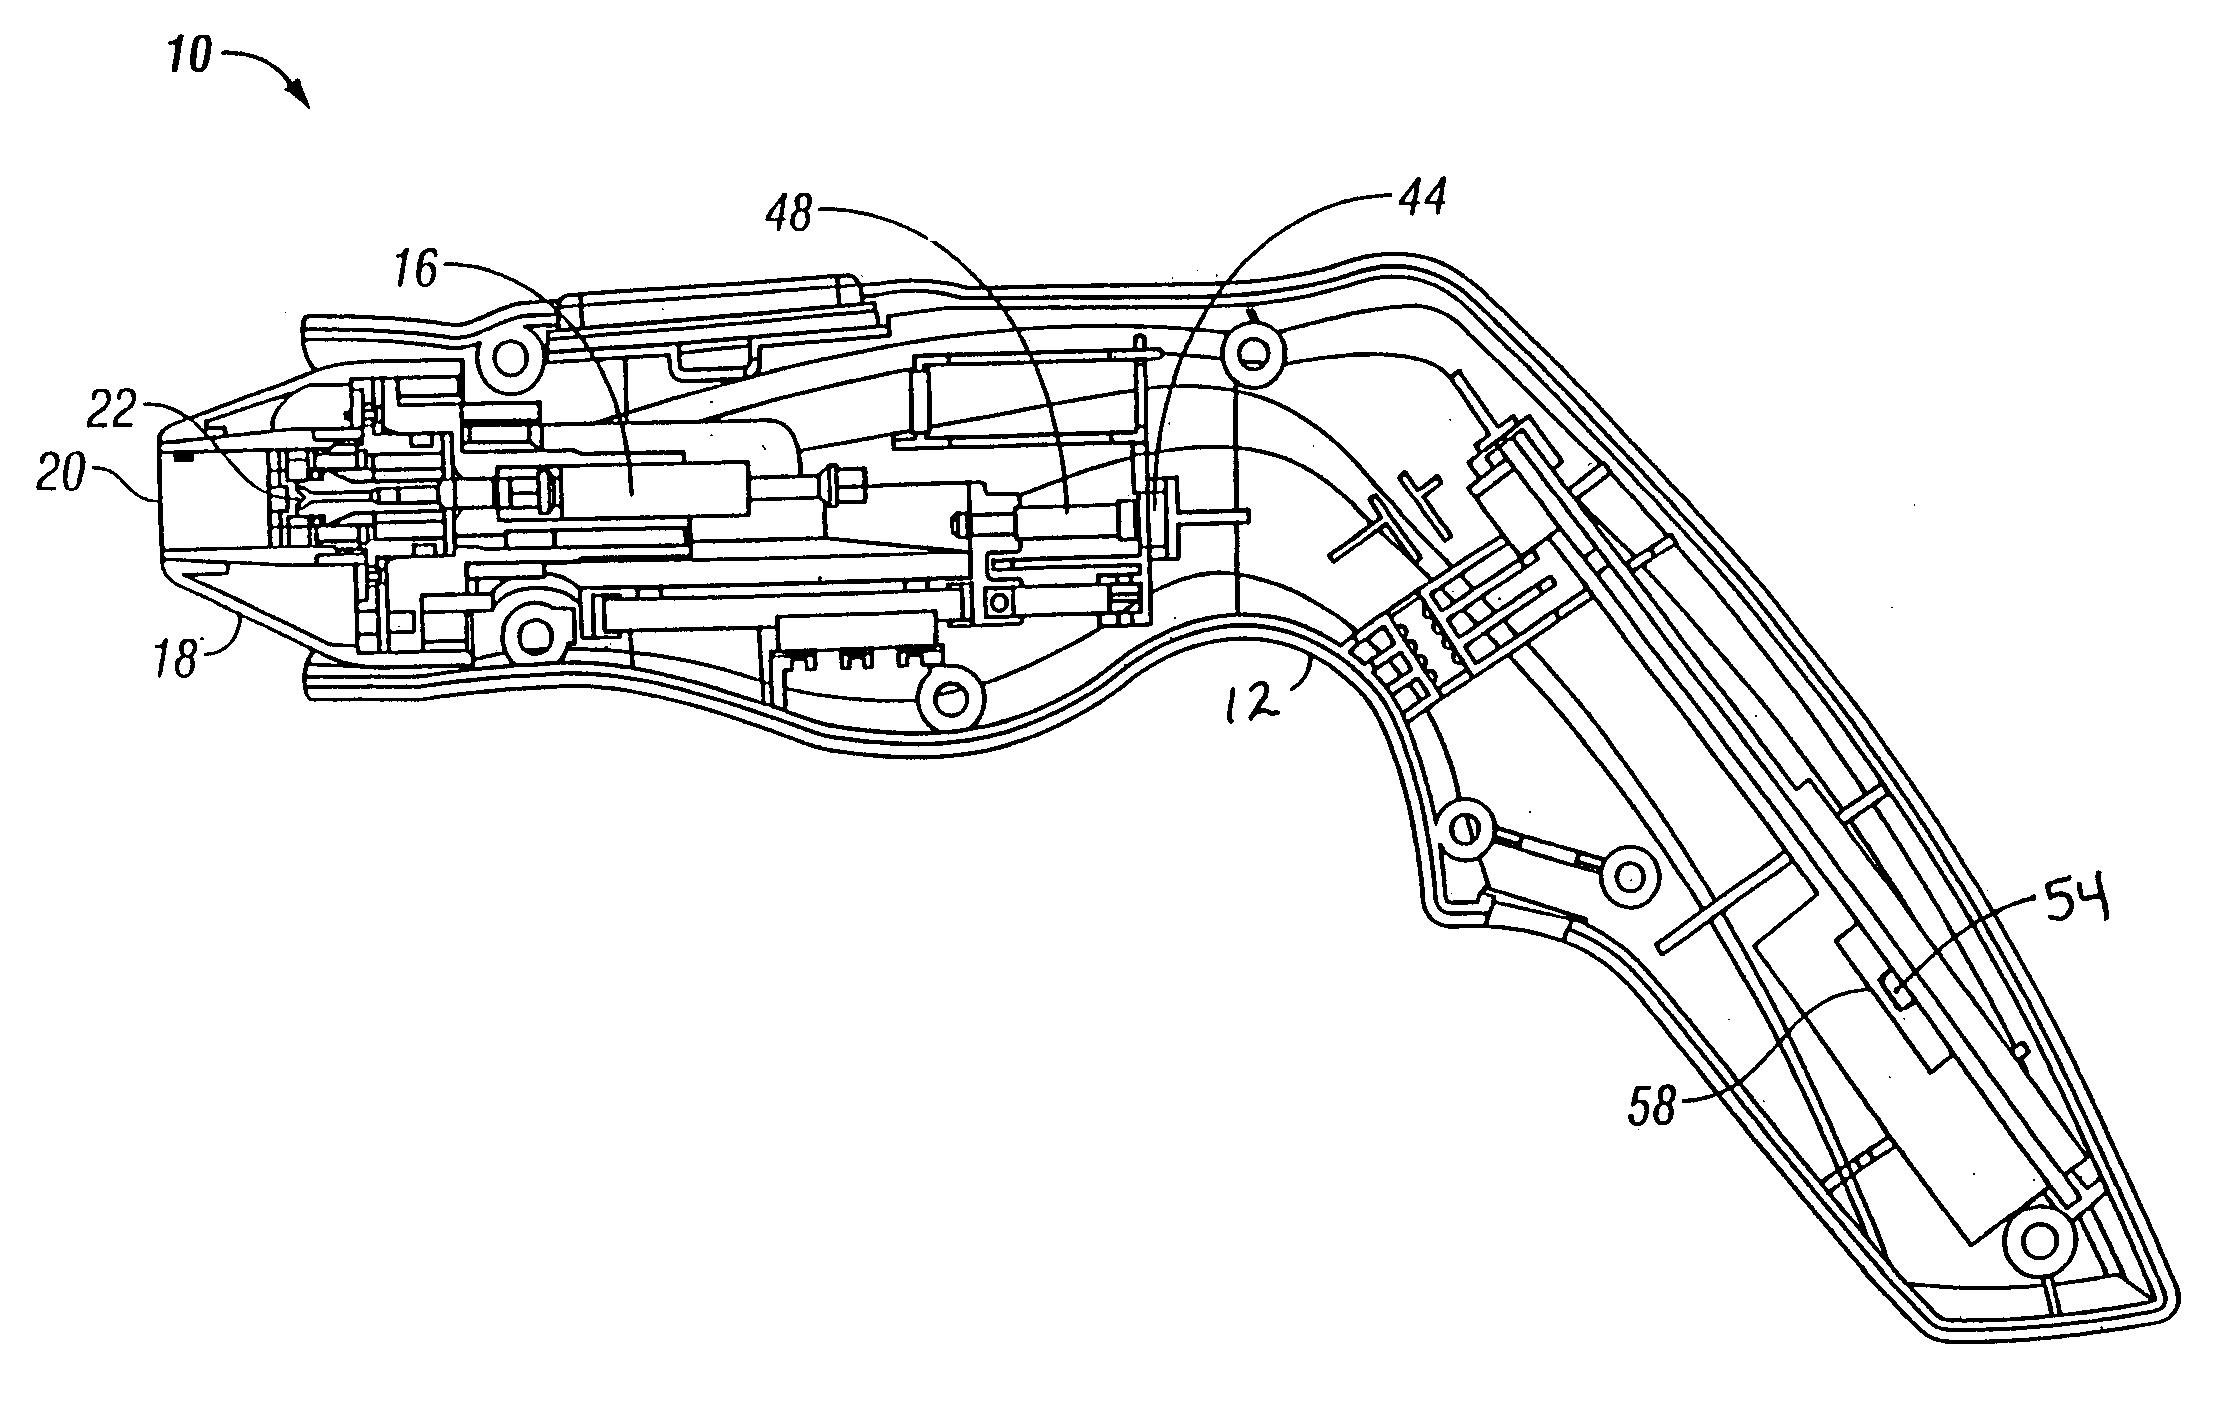 Handpiece with RF electrode and non-volatile memory